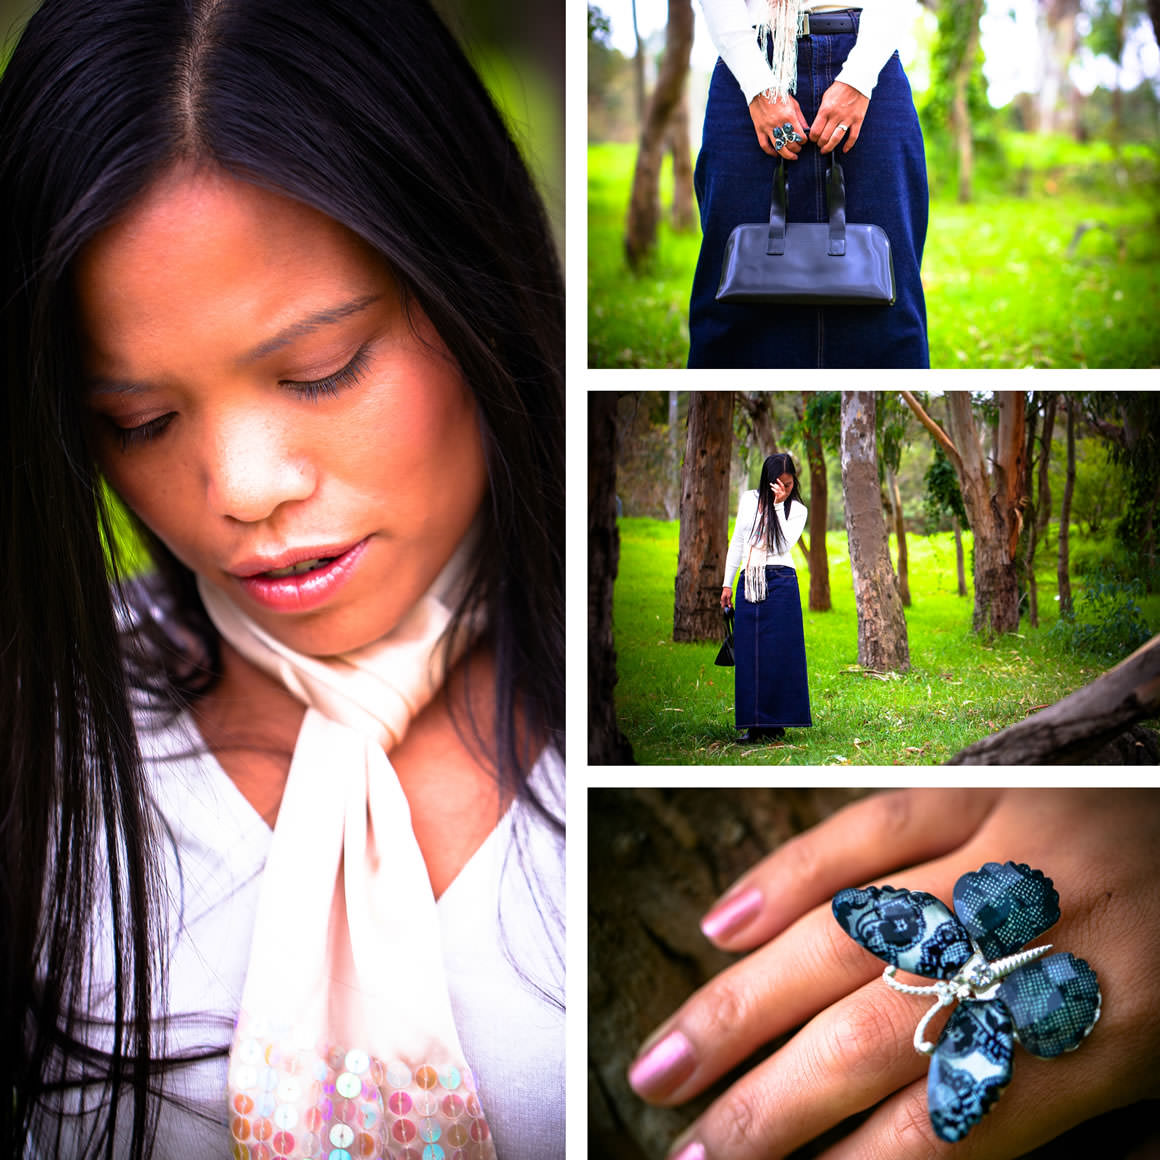 Fashion Blog in Melbourne features nature photo shoot